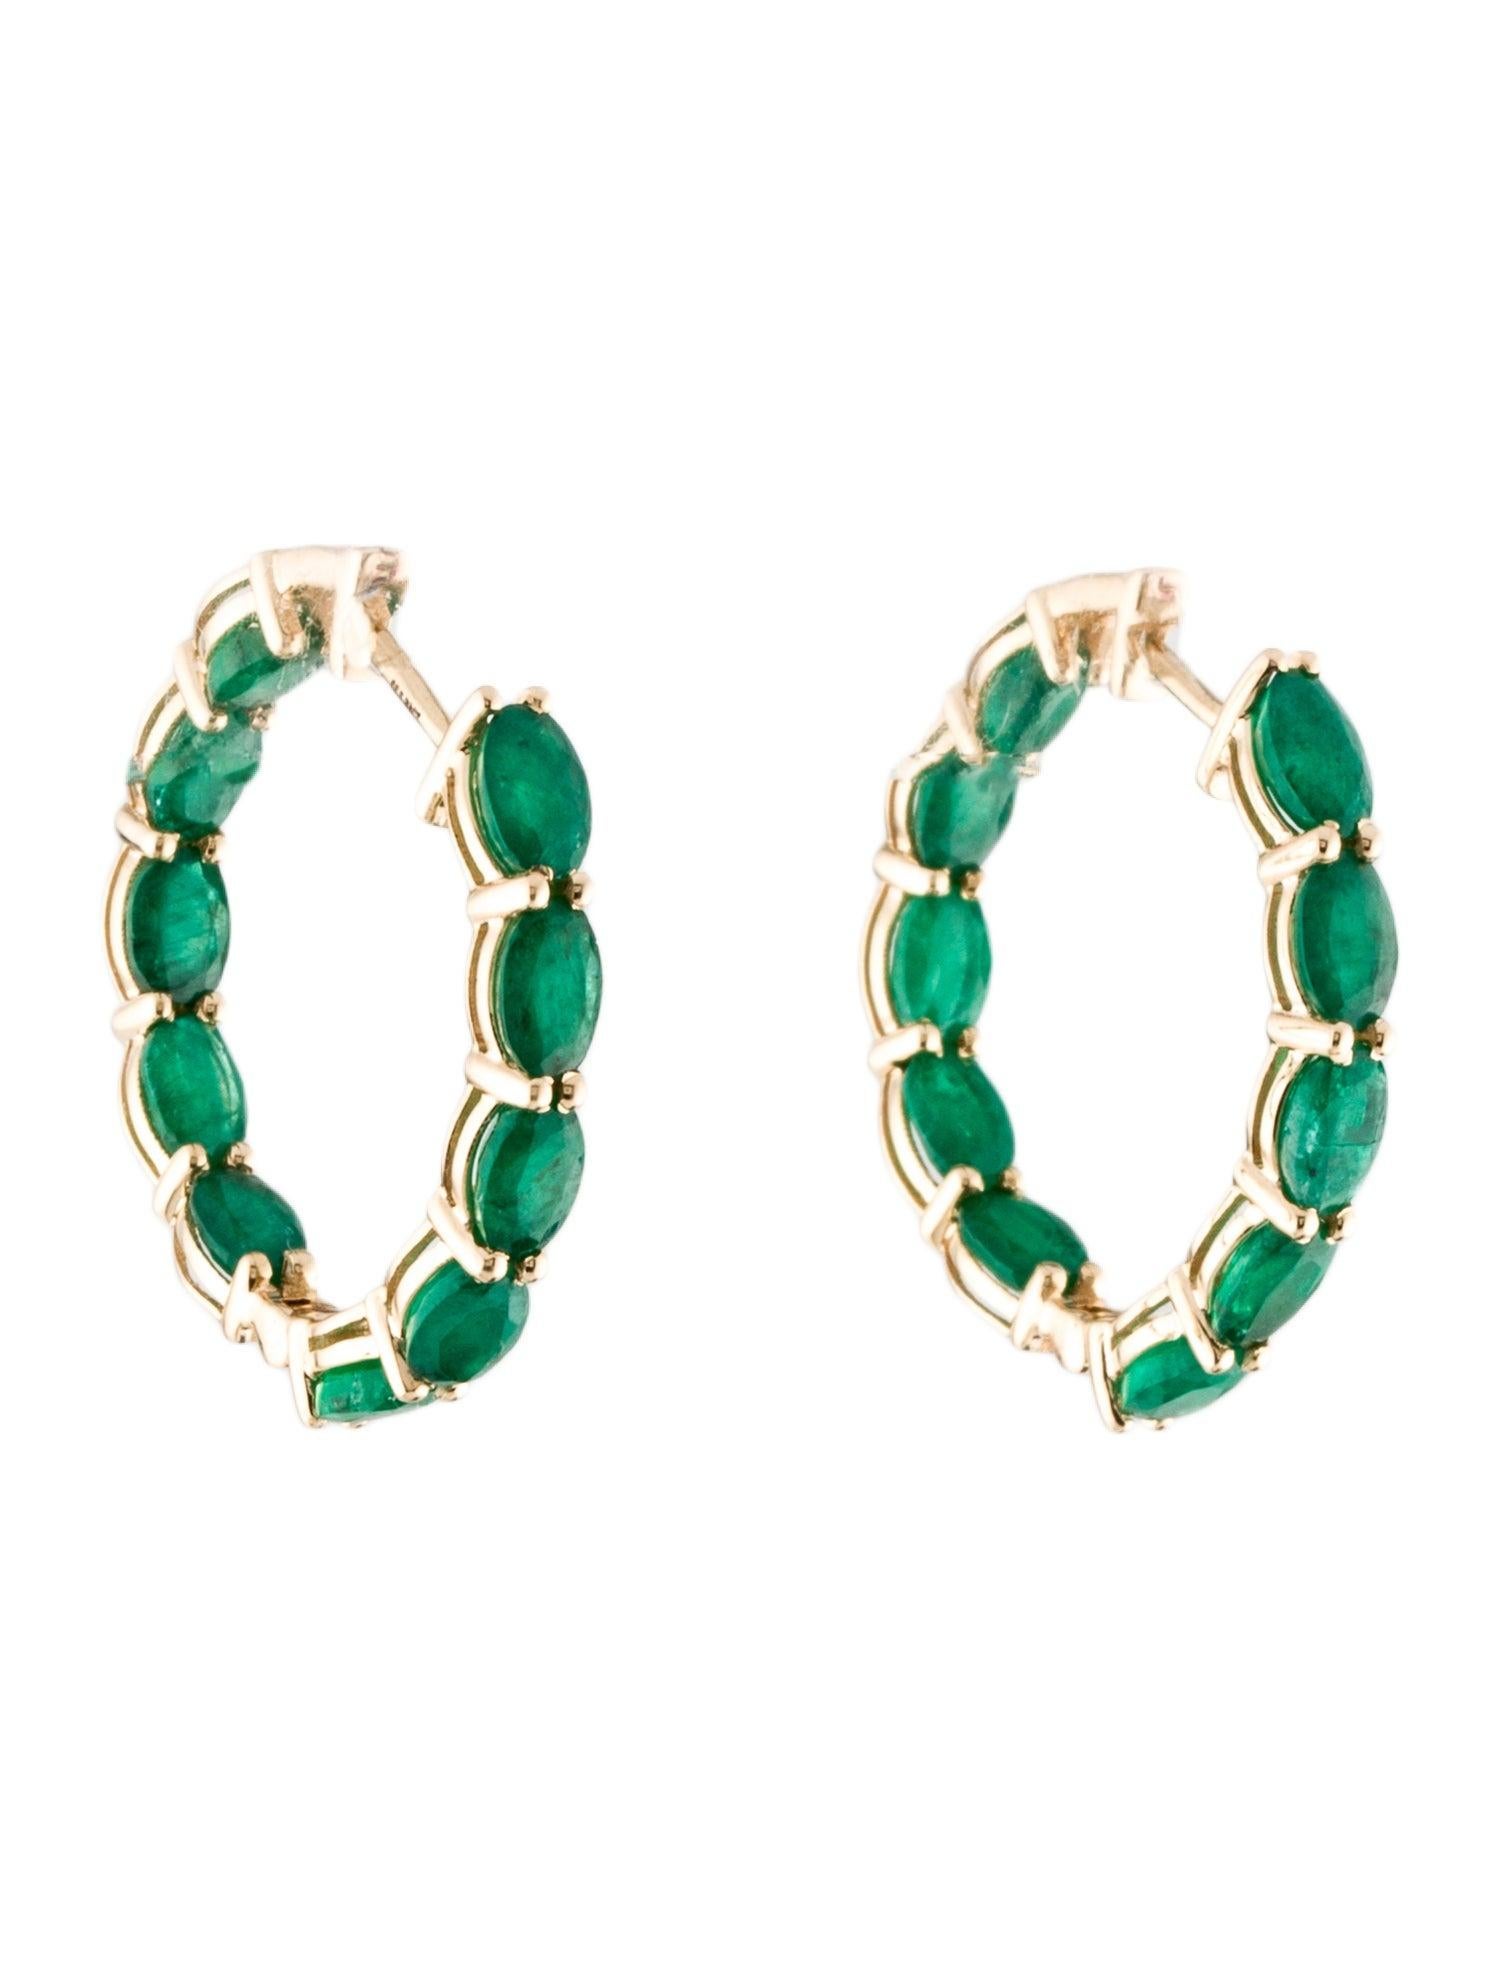 Presenting our stunning 14K Yellow Gold Emerald Inside-Outside Hoop Earrings, a must-have for any fine jewelry enthusiast. These exquisite earrings feature 20 oval modified brilliant emeralds, each chosen for its deep green hue and moderate clarity,